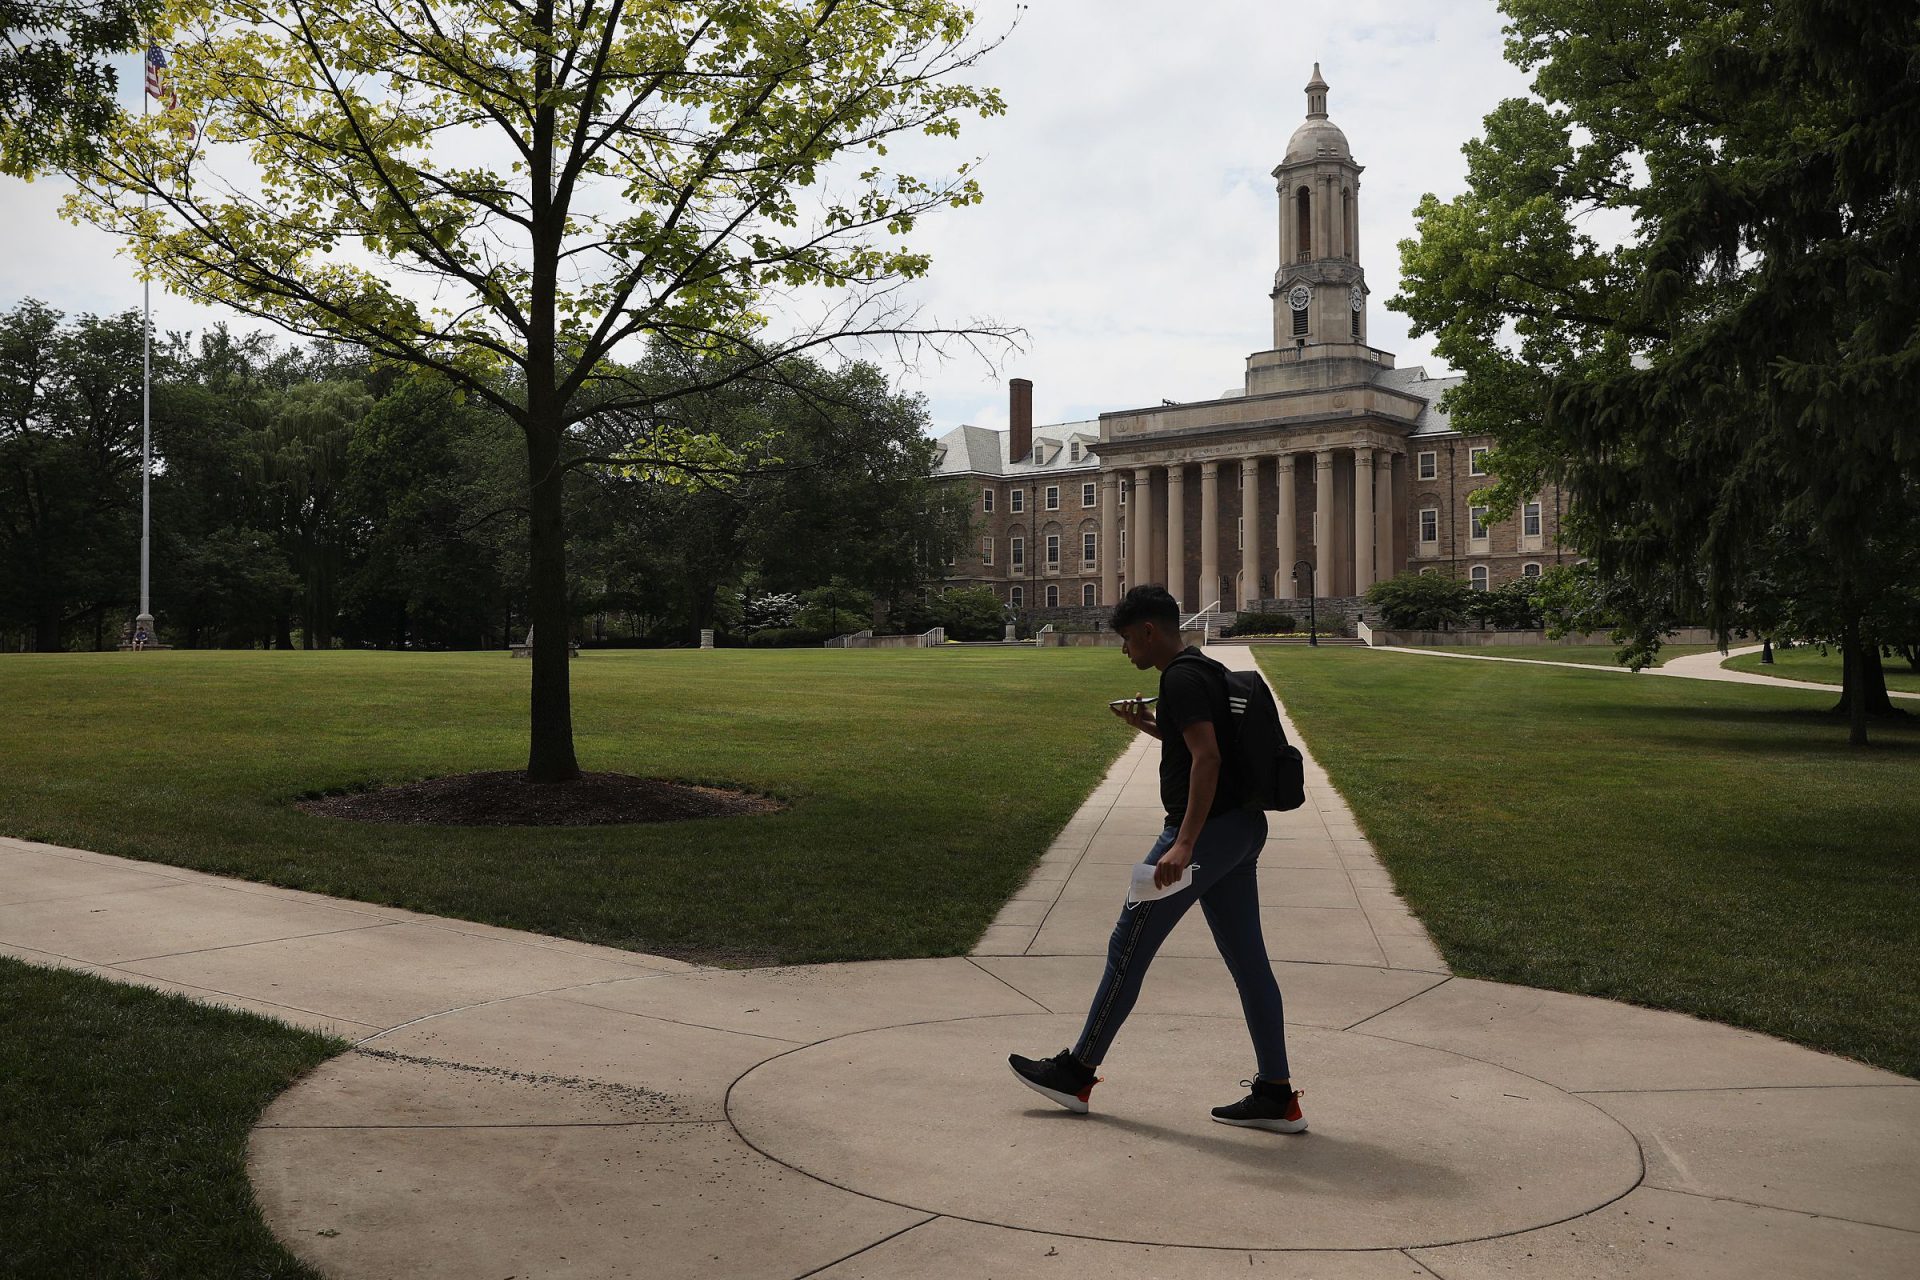 Penn State, which plans to hold in-person classes for the fall semester, is requiring all students to sign a waiver freeing the university of any responsibility should they contract COVID-19 while on campus.